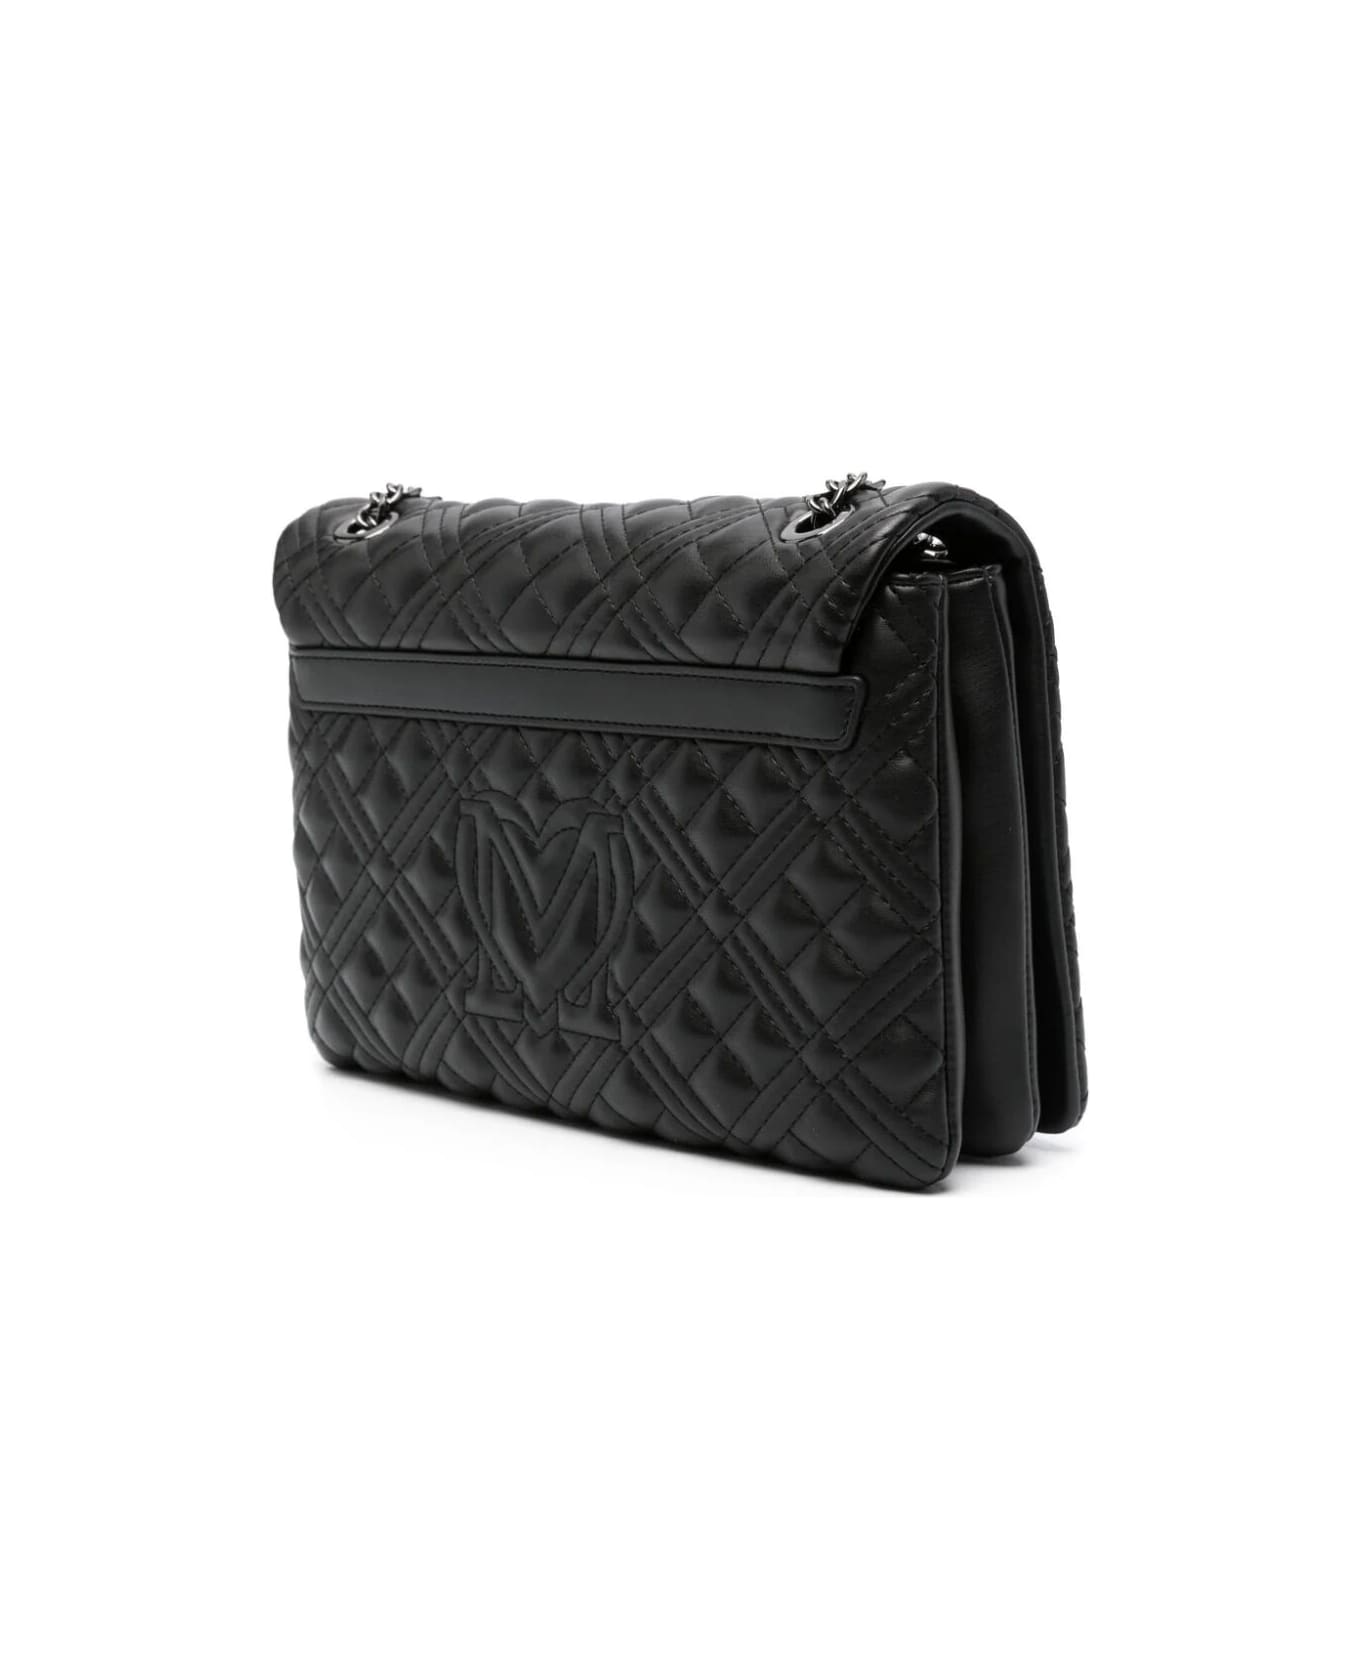 Love Moschino Quilted Shoulder Bag - A Black